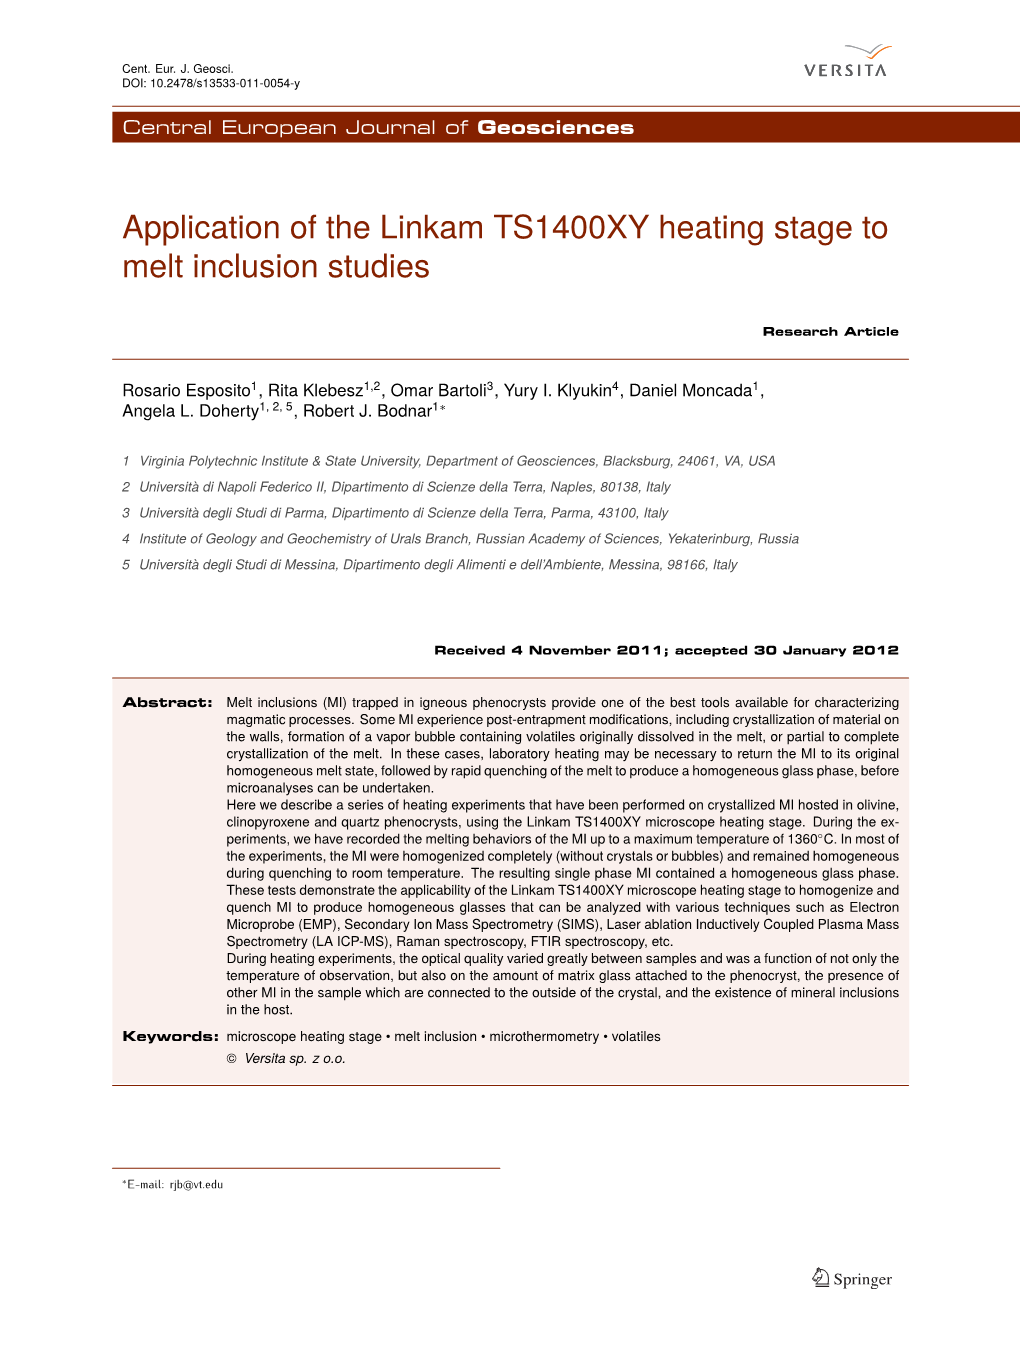 Application of the Linkam TS1400XY Heating Stage to Melt Inclusion Studies